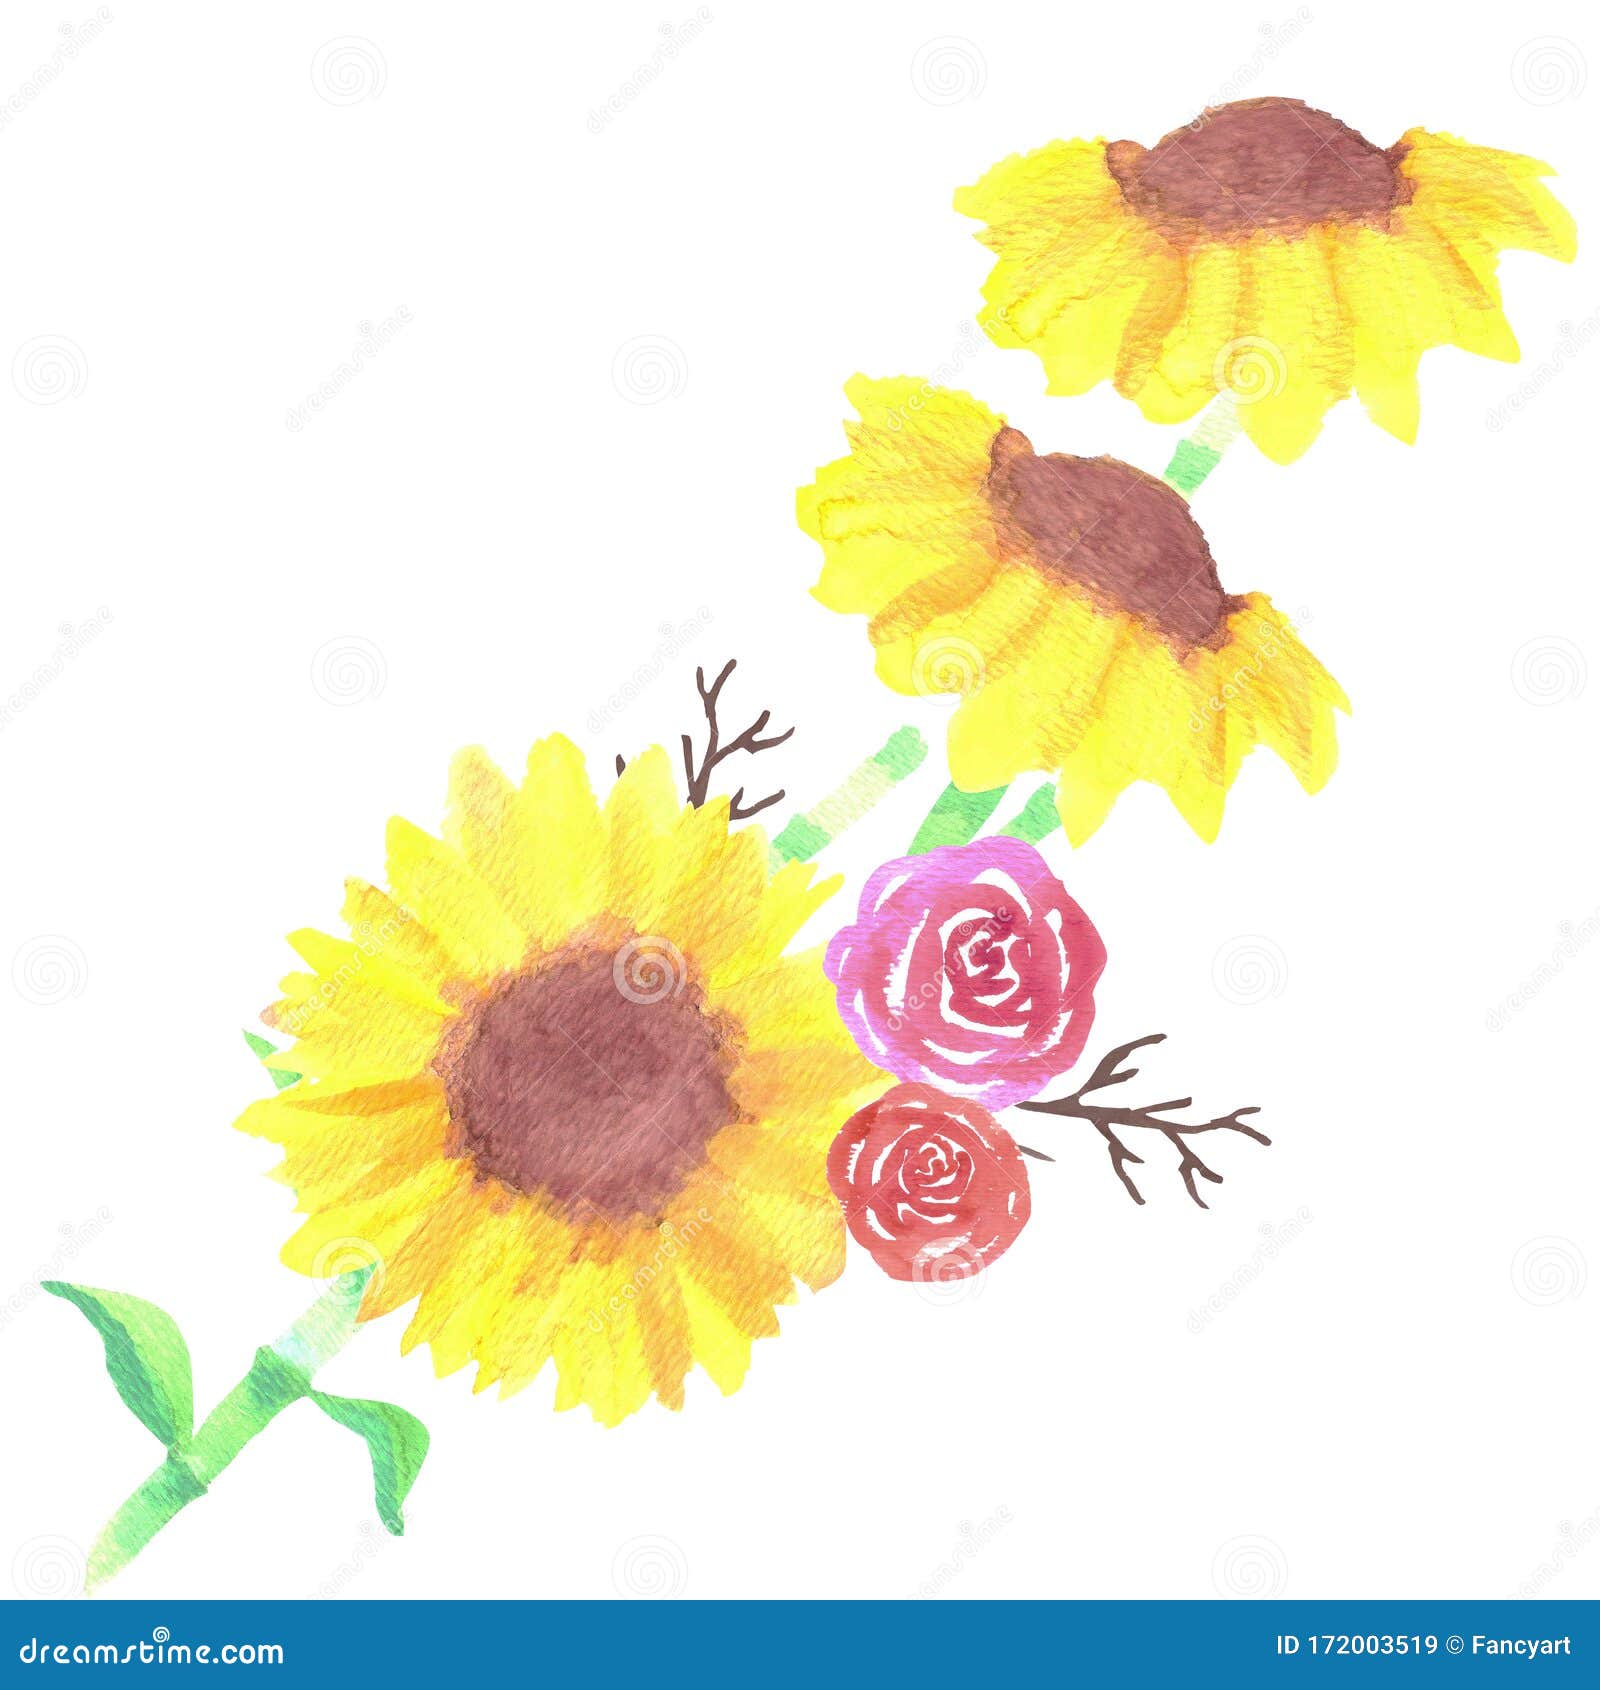 Download Sunflower And Roses Bouquet With Twigs Watercolor Medium ...